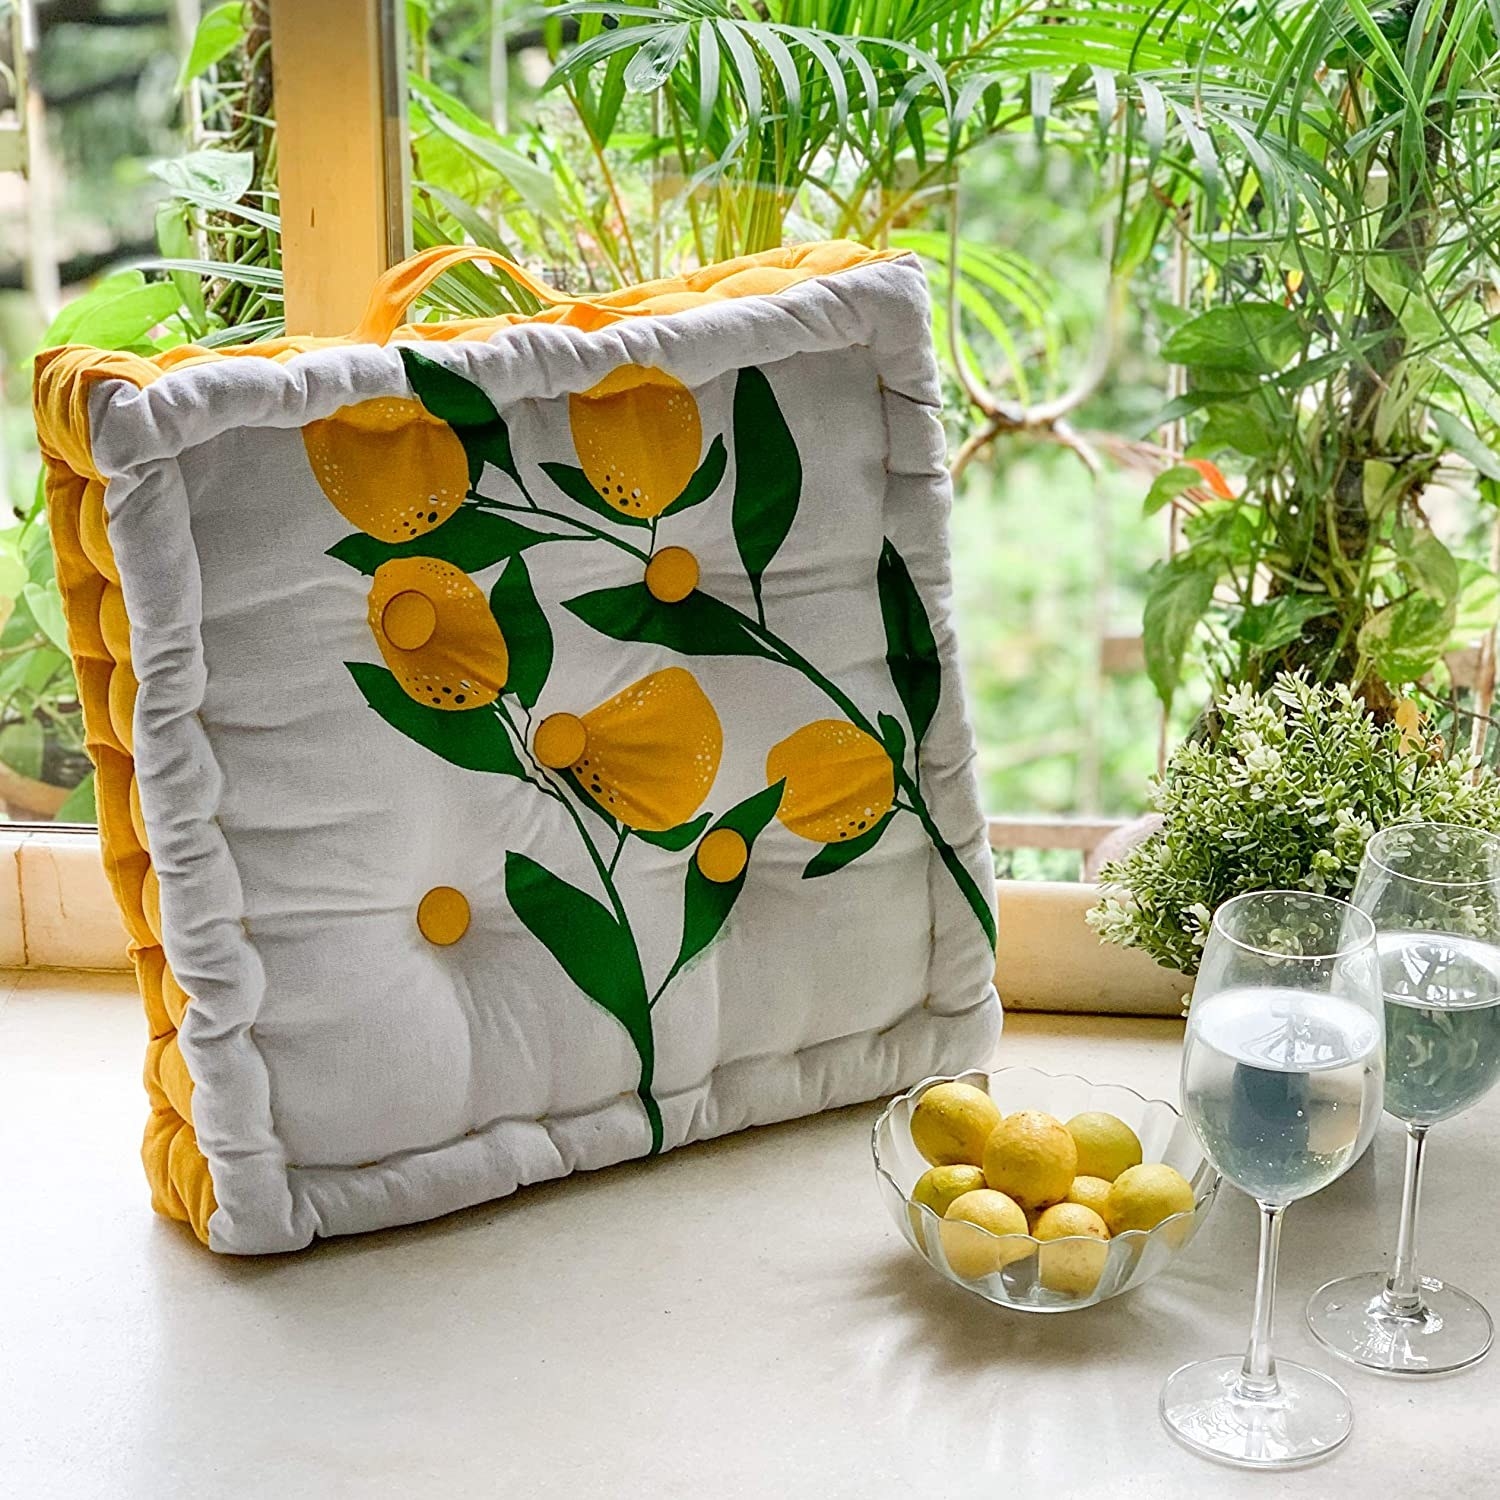 A floor pillow with lemons and two wine glasses beside it